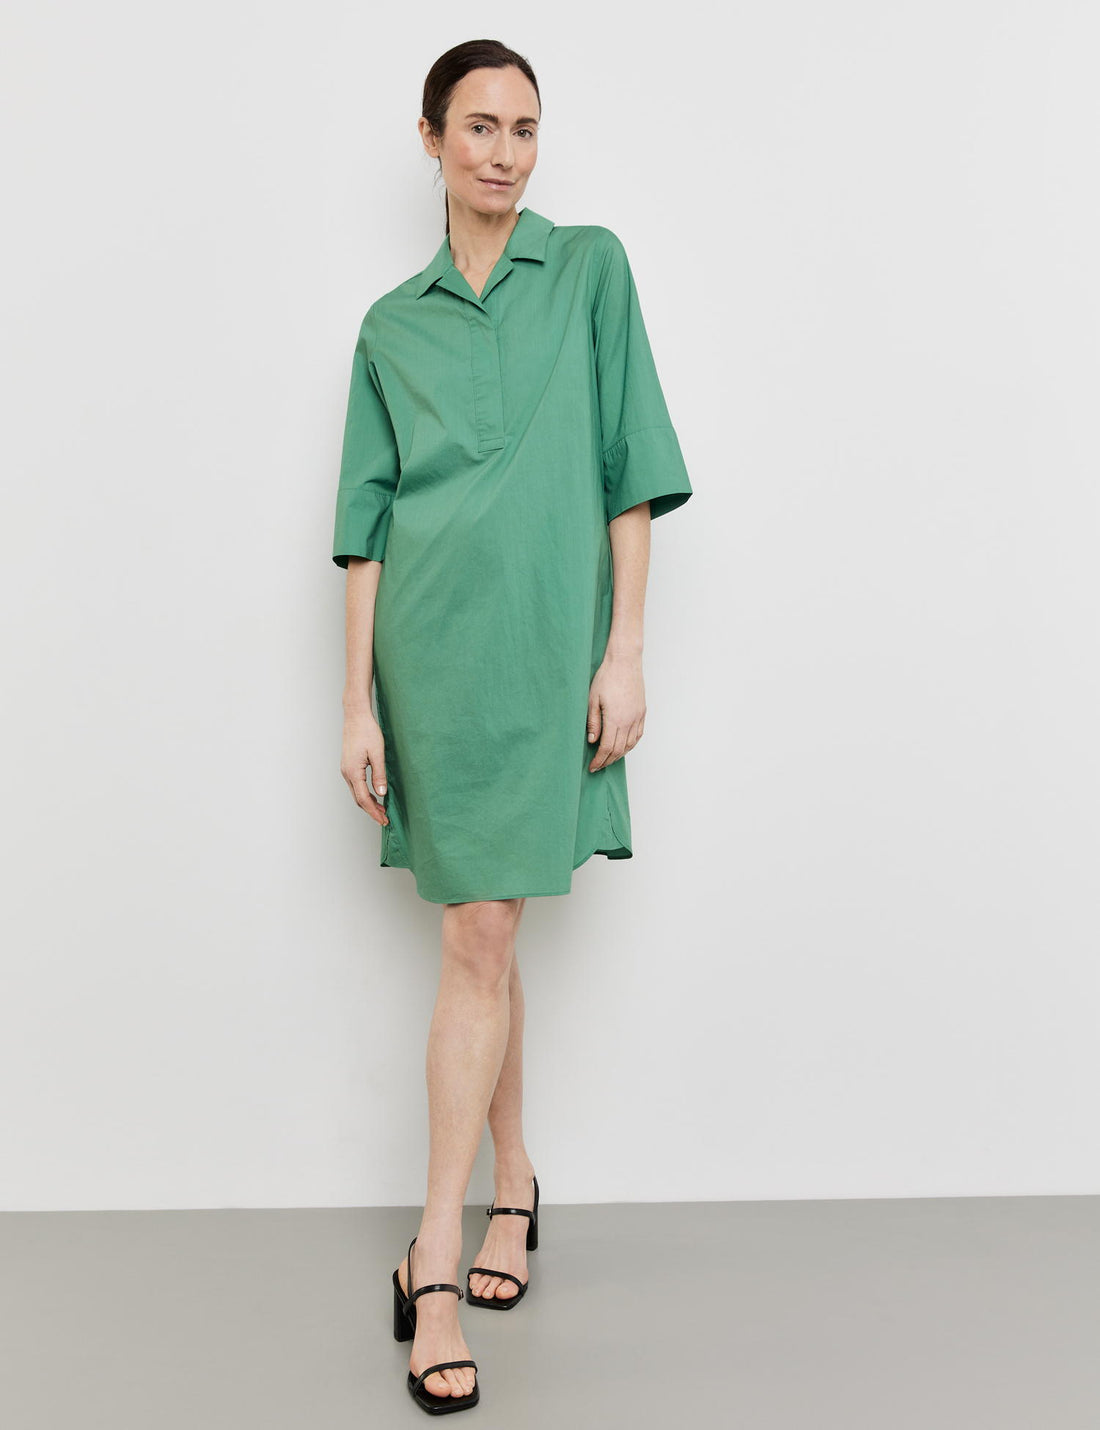 Casual Linen Dress With An Inverted Pleat_285045-66449_50946_01